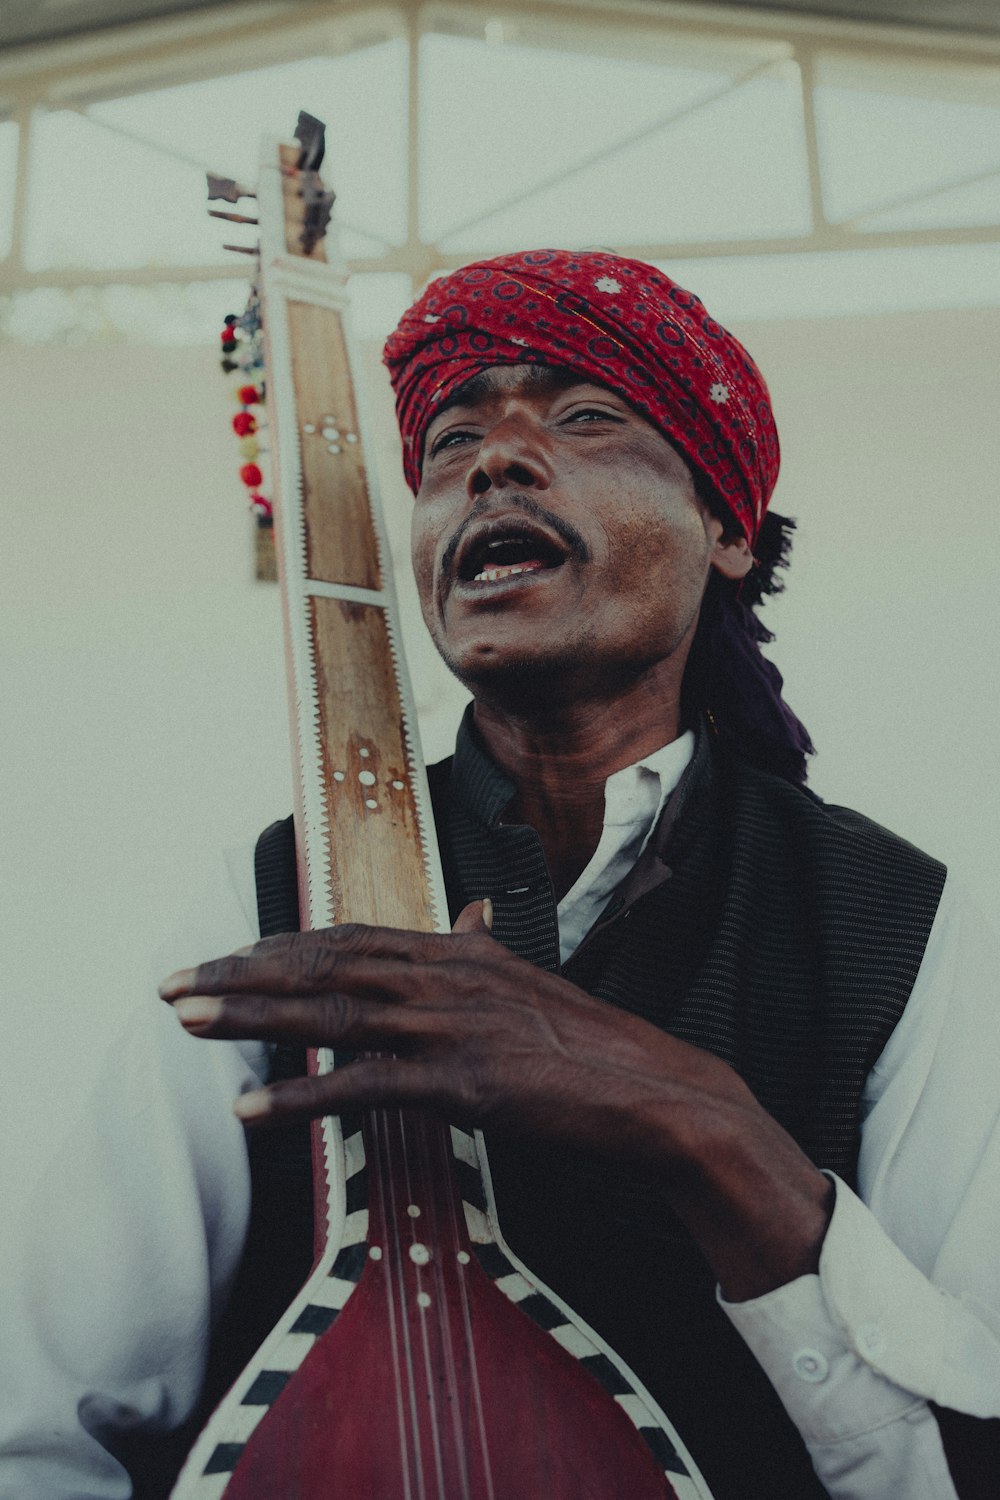 A man with a red bandana holding a guitar photo – Free Person Image on  Unsplash